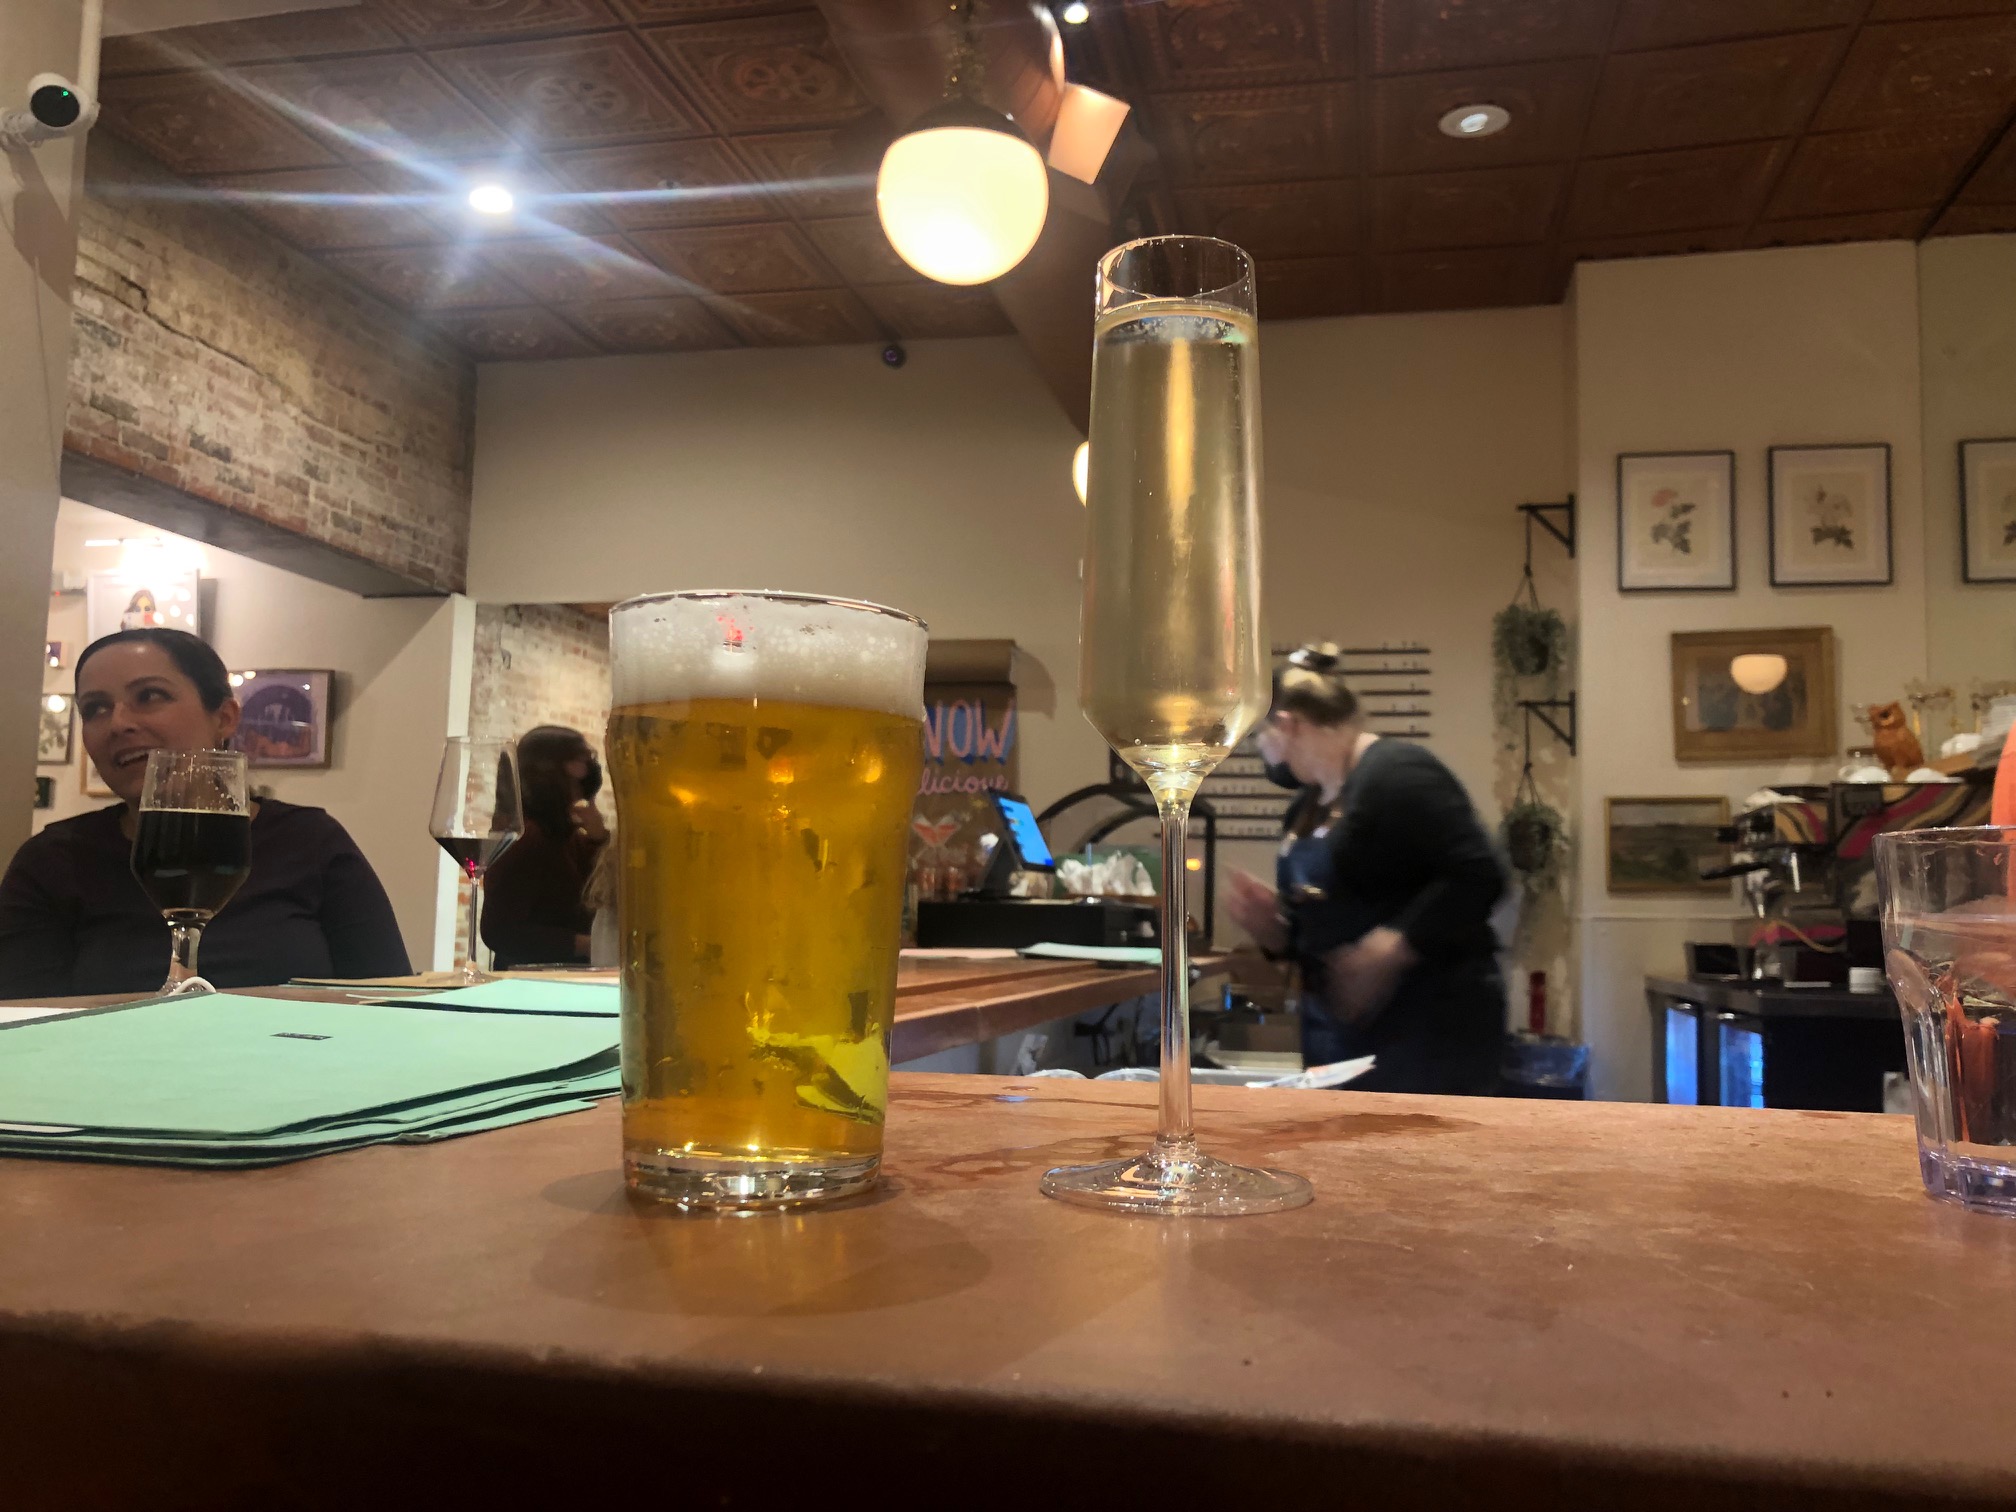 A beer glass and champagne flute are sitting on a bar. In the background are people sitting along the bar, and a bartender is behind the bar. Photo by Alyssa Buckley.